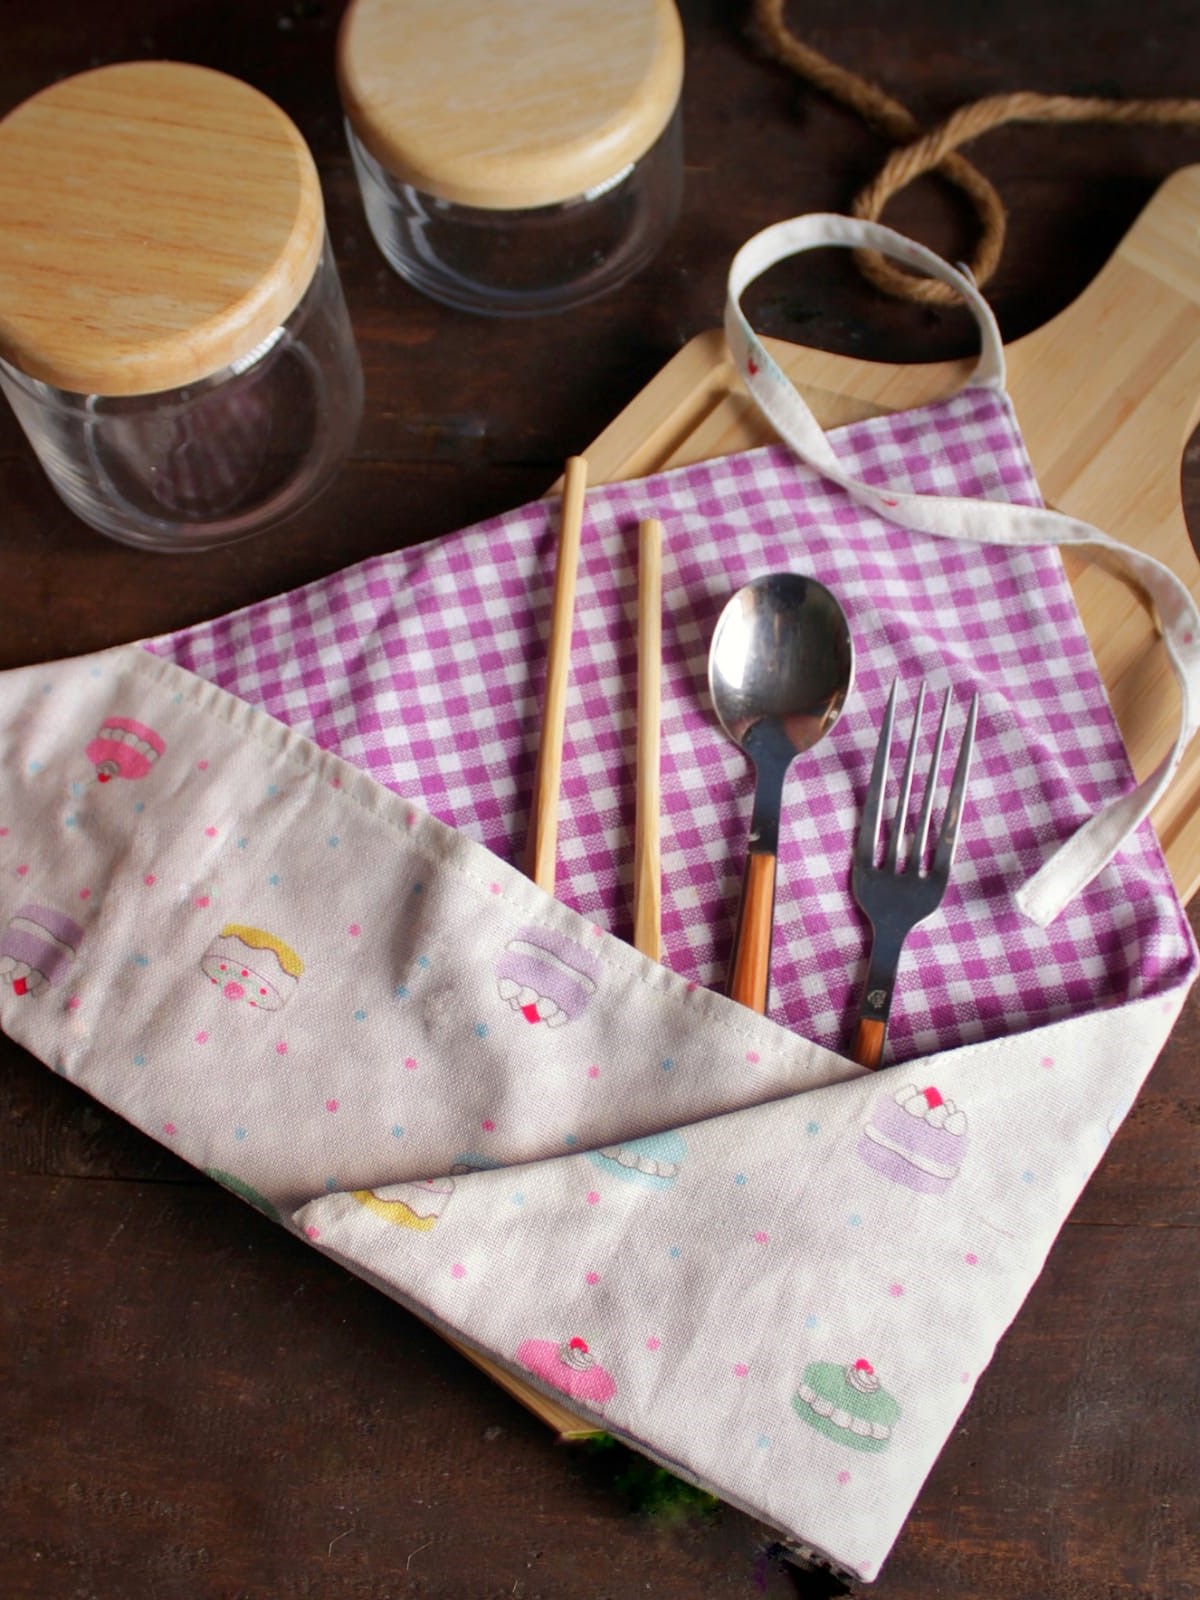 Cutlery Wrap / Cutlery Carry Pouch - Reversible - cupcake and purple gingham themed